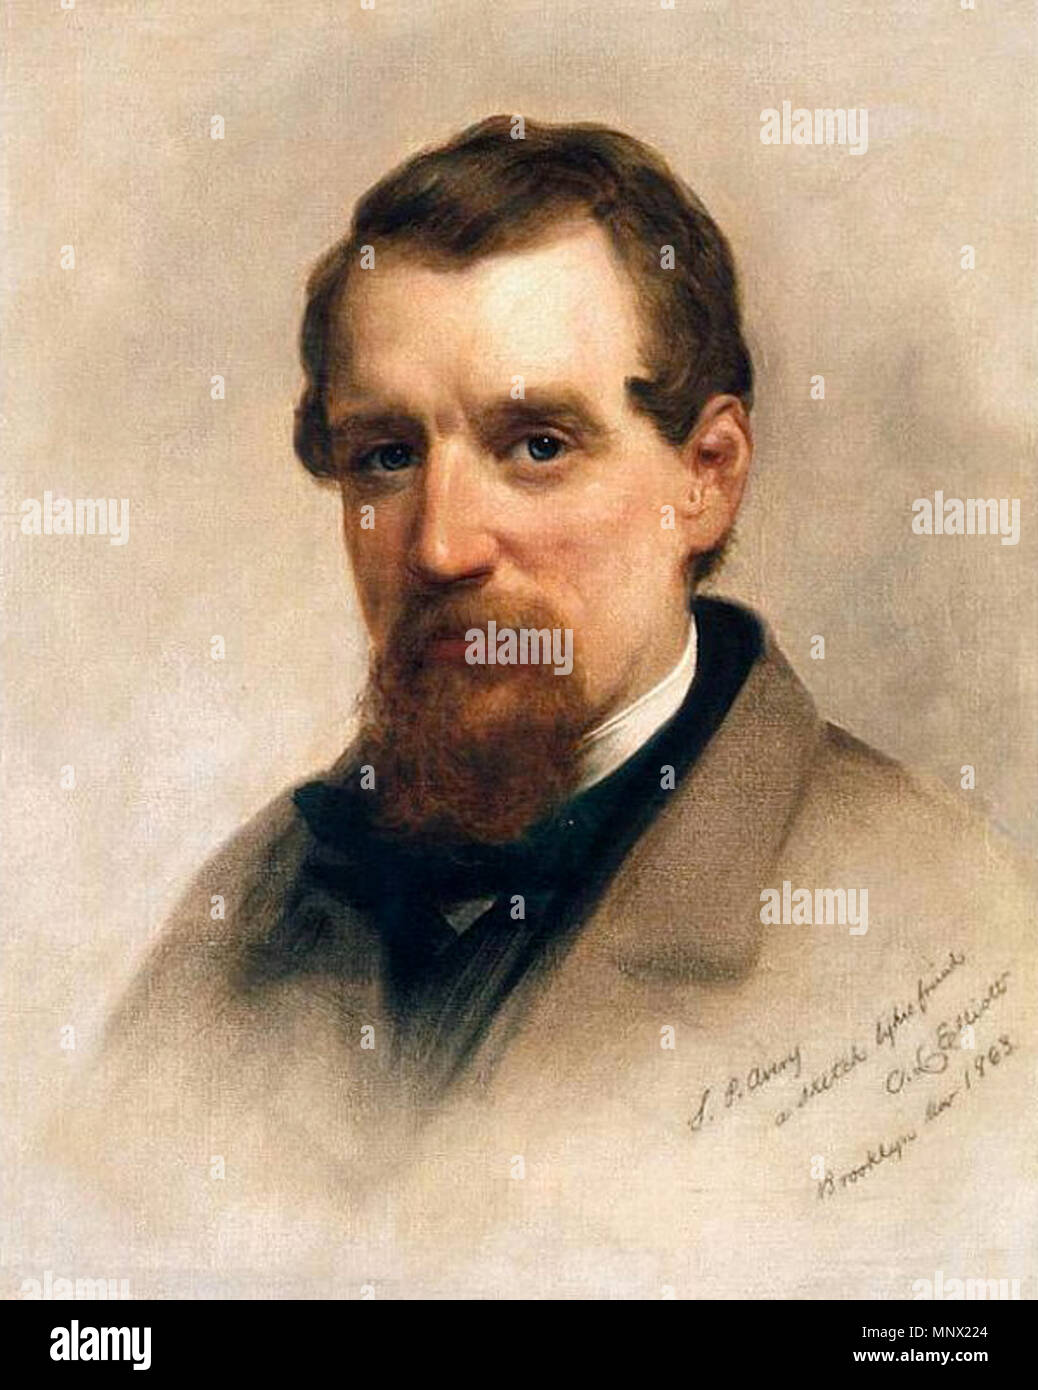 . English: A portrait of Samuel Putnam Avery, painted by Charles Loring Elliott. A prominent art dealer and patron of the arts, Avery was one of the founders of the Metropolitan Museum of Art. 1863.   Charles Loring Elliott  (1812–1868)     Alternative names Charles Loring Elliot; charles loring elliott; charles loring eliott  Description American portrait painter  Date of birth/death 1812 1868  Location of birth Auburn  Authority control  : Q5080338 VIAF: 23293204 ISNI: 0000 0000 6686 3395 ULAN: 500013029 LCCN: nr93012905 GND: 132199076 WorldCat 1089 Samuel Putnam Avery Stock Photo